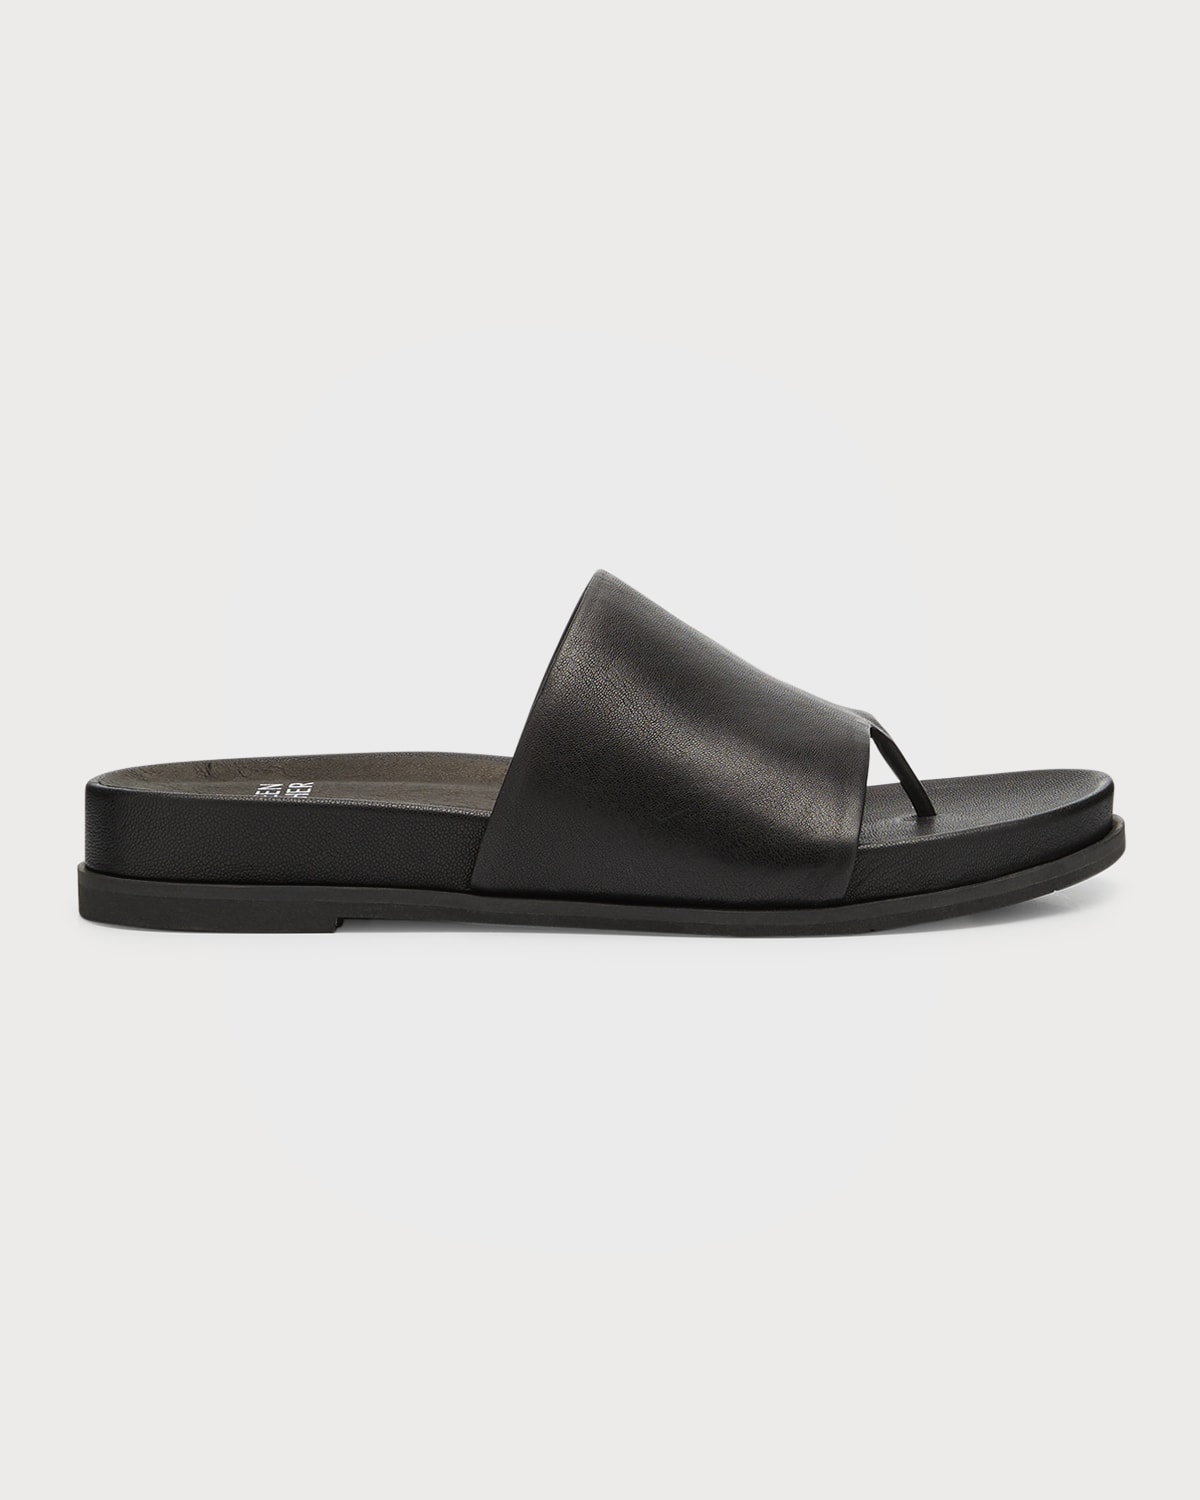 EILEEN FISHER DUET LEATHER THONG SLIDE SANDALS